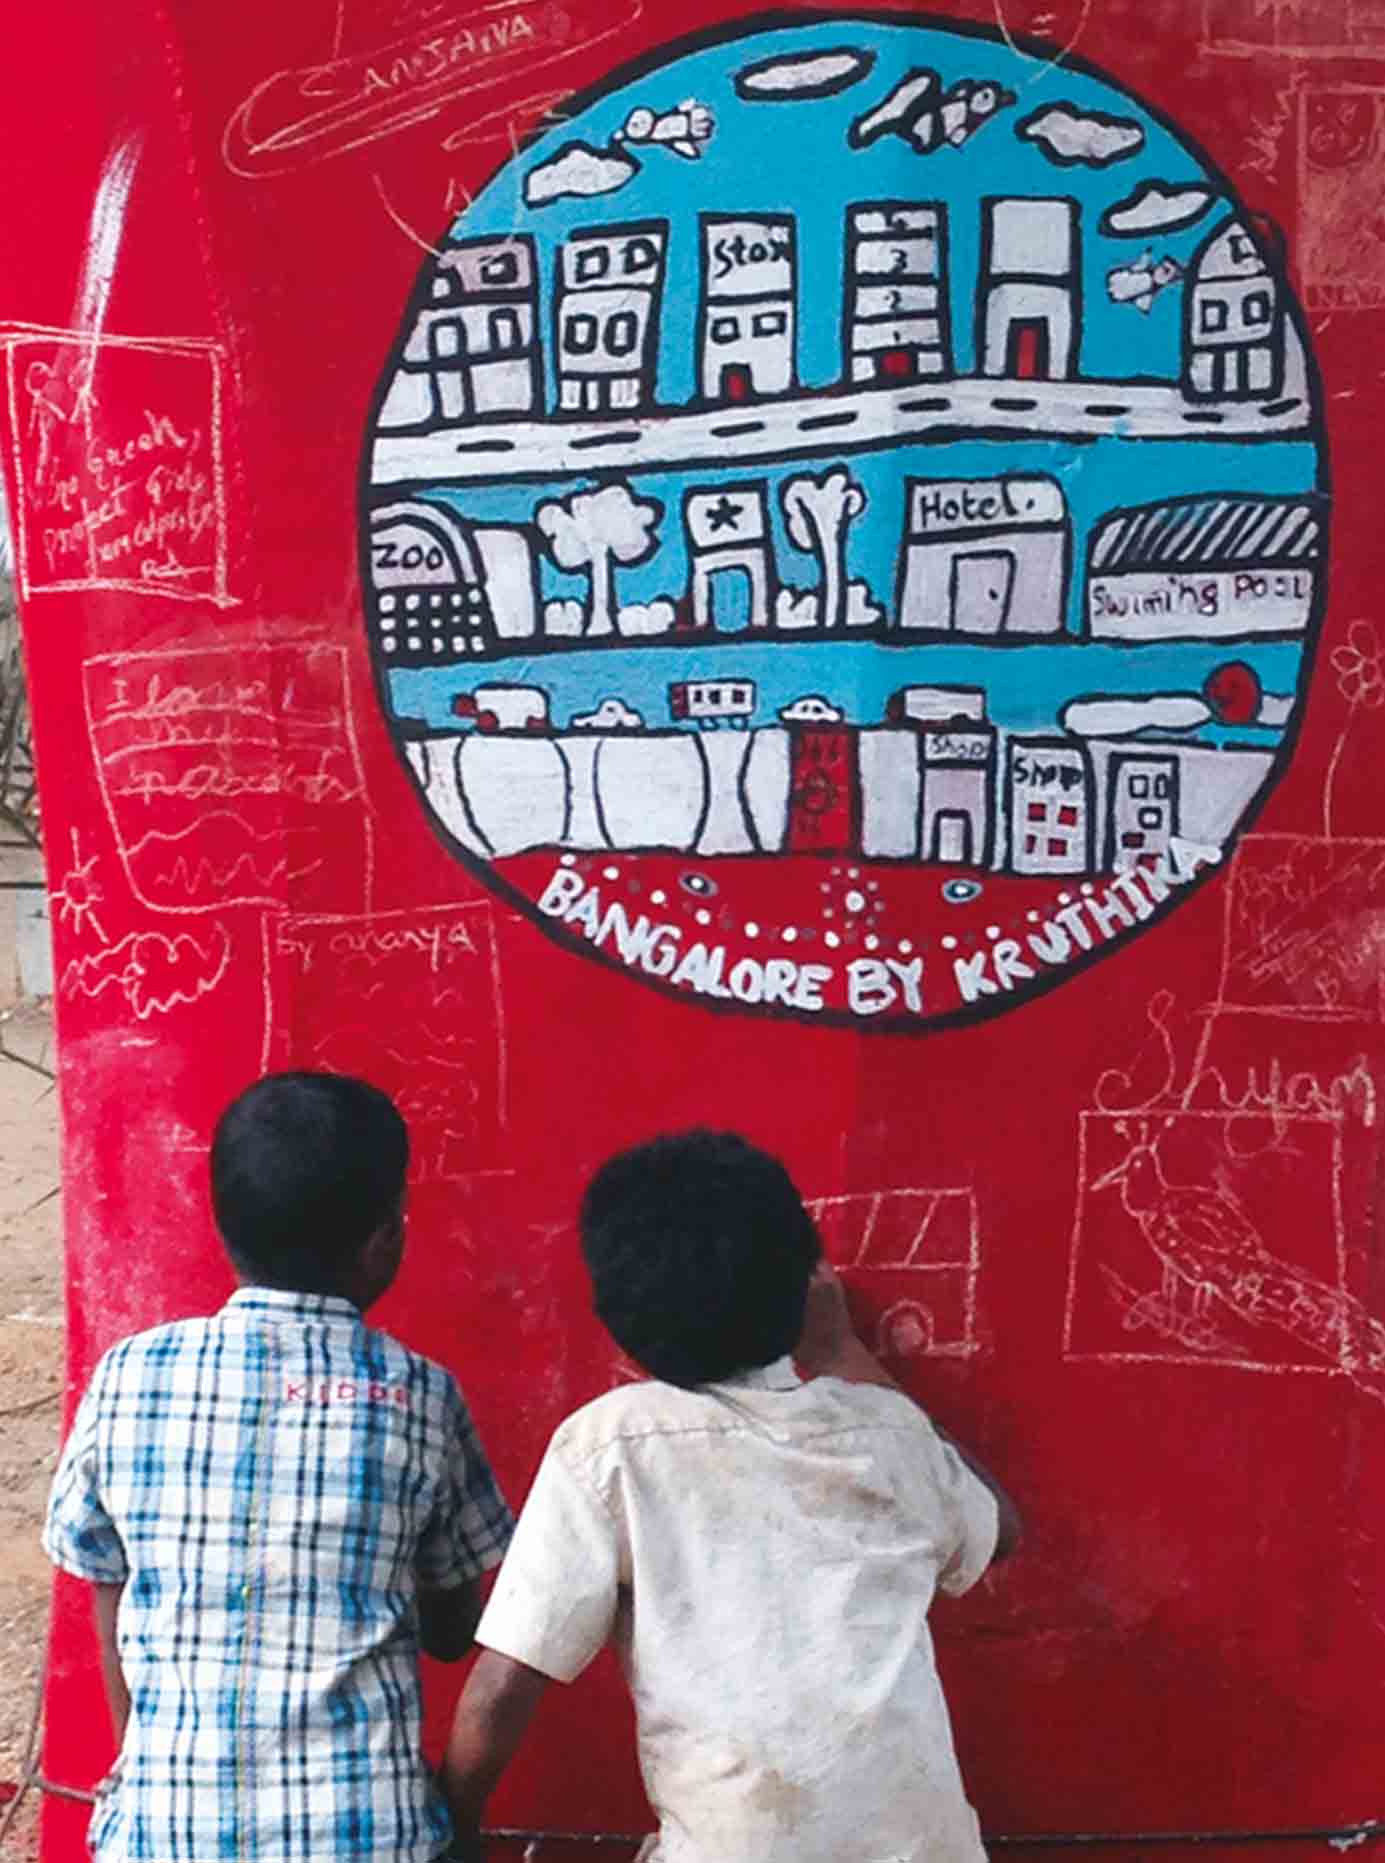 community-art-jaaga-initiative-enthusiastic-children-wanted-part-project-given-chalk-draw-columns